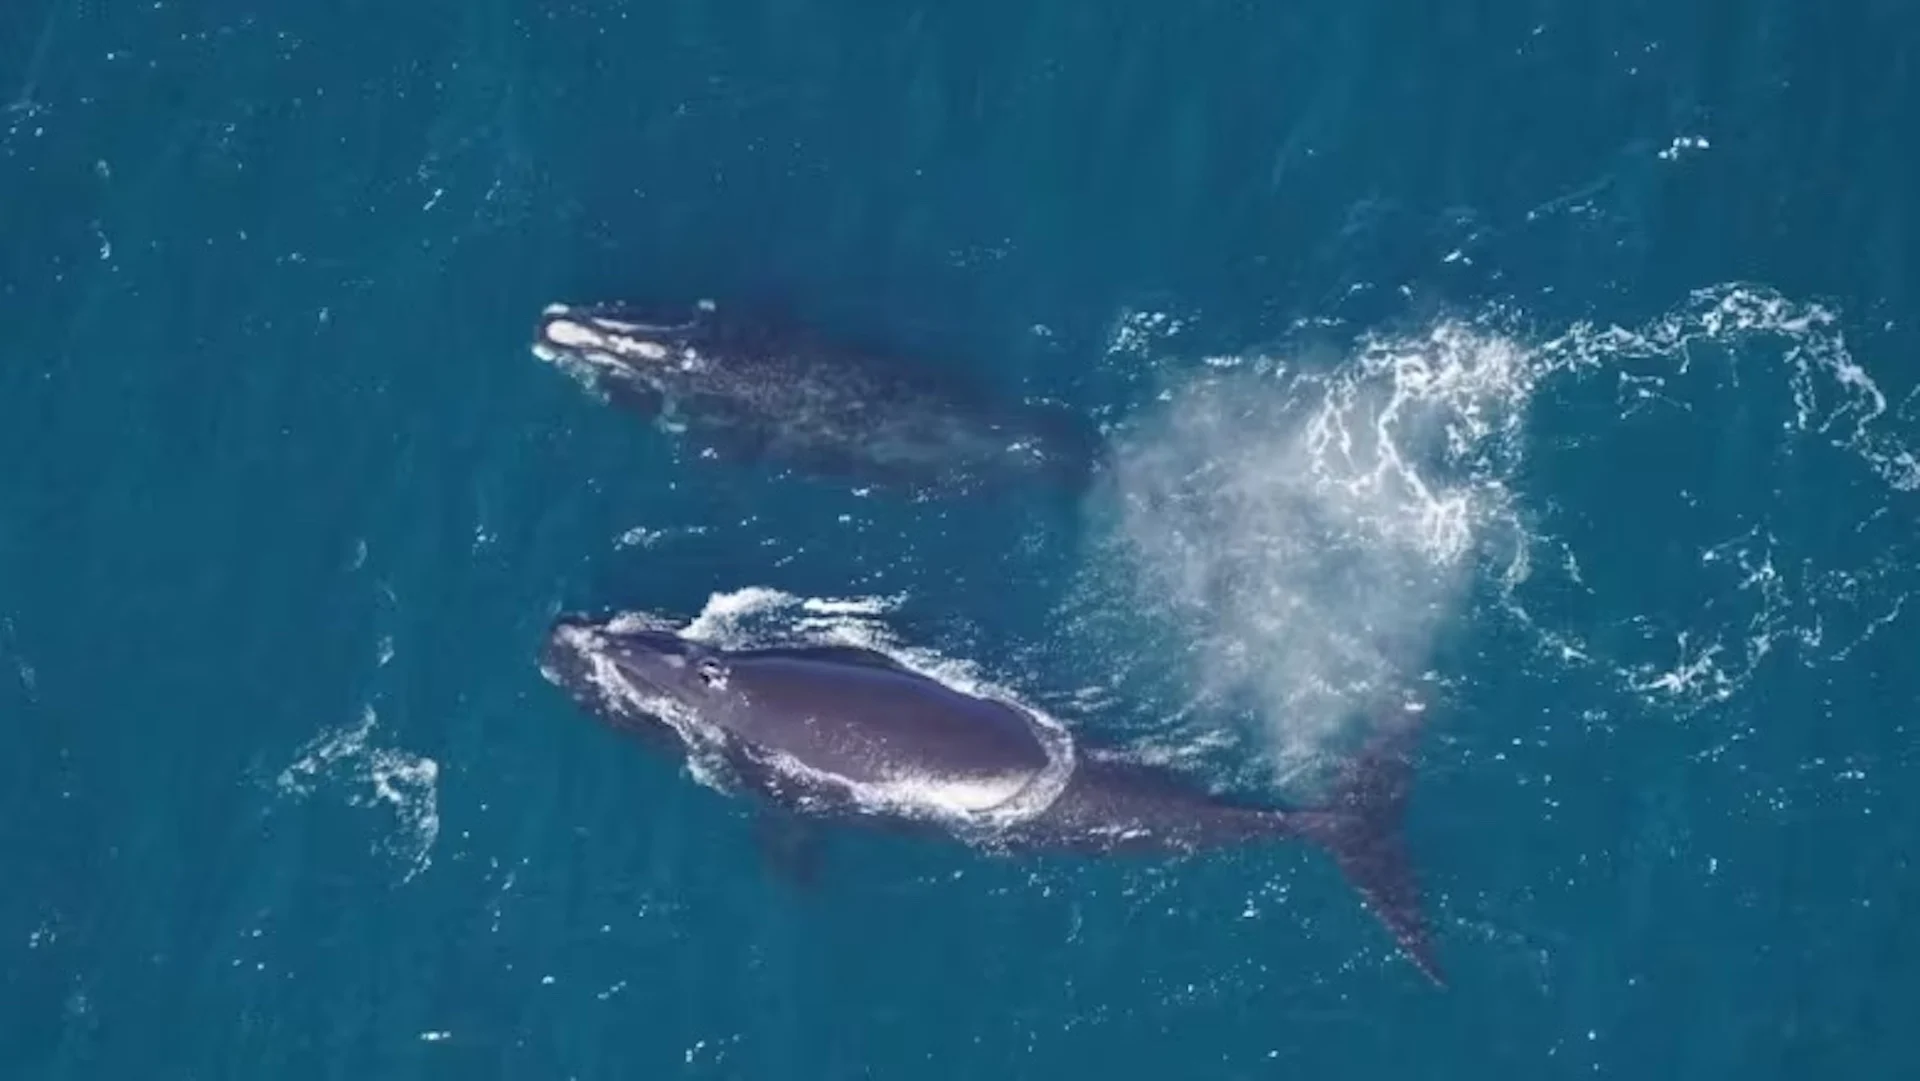 North Atlantic right whale population has steadied, scientists say